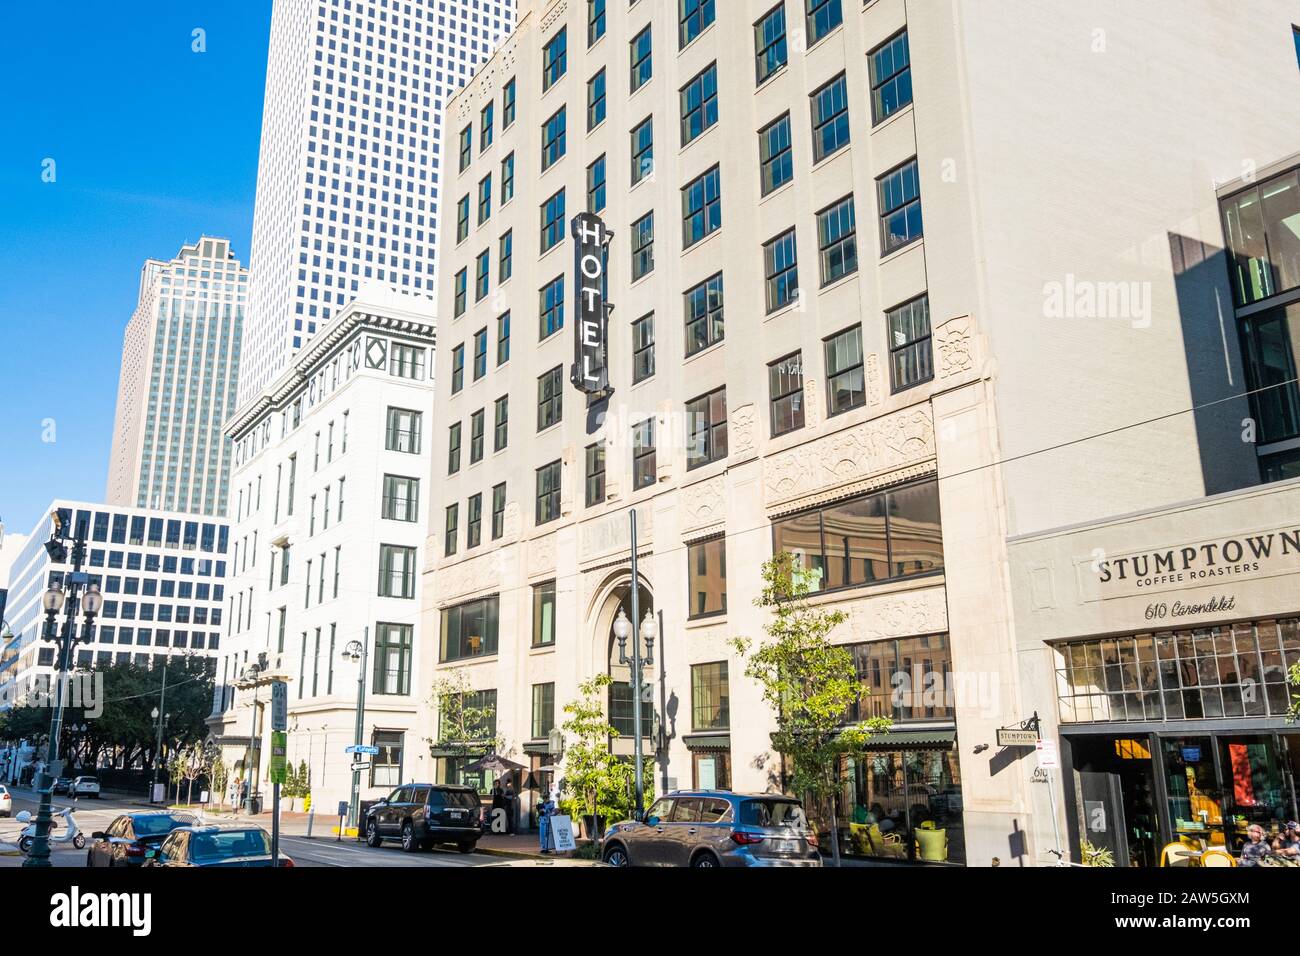 Ace Hotel, a Boutique Hotel in the Central Business District of New Orleans Stock Photo